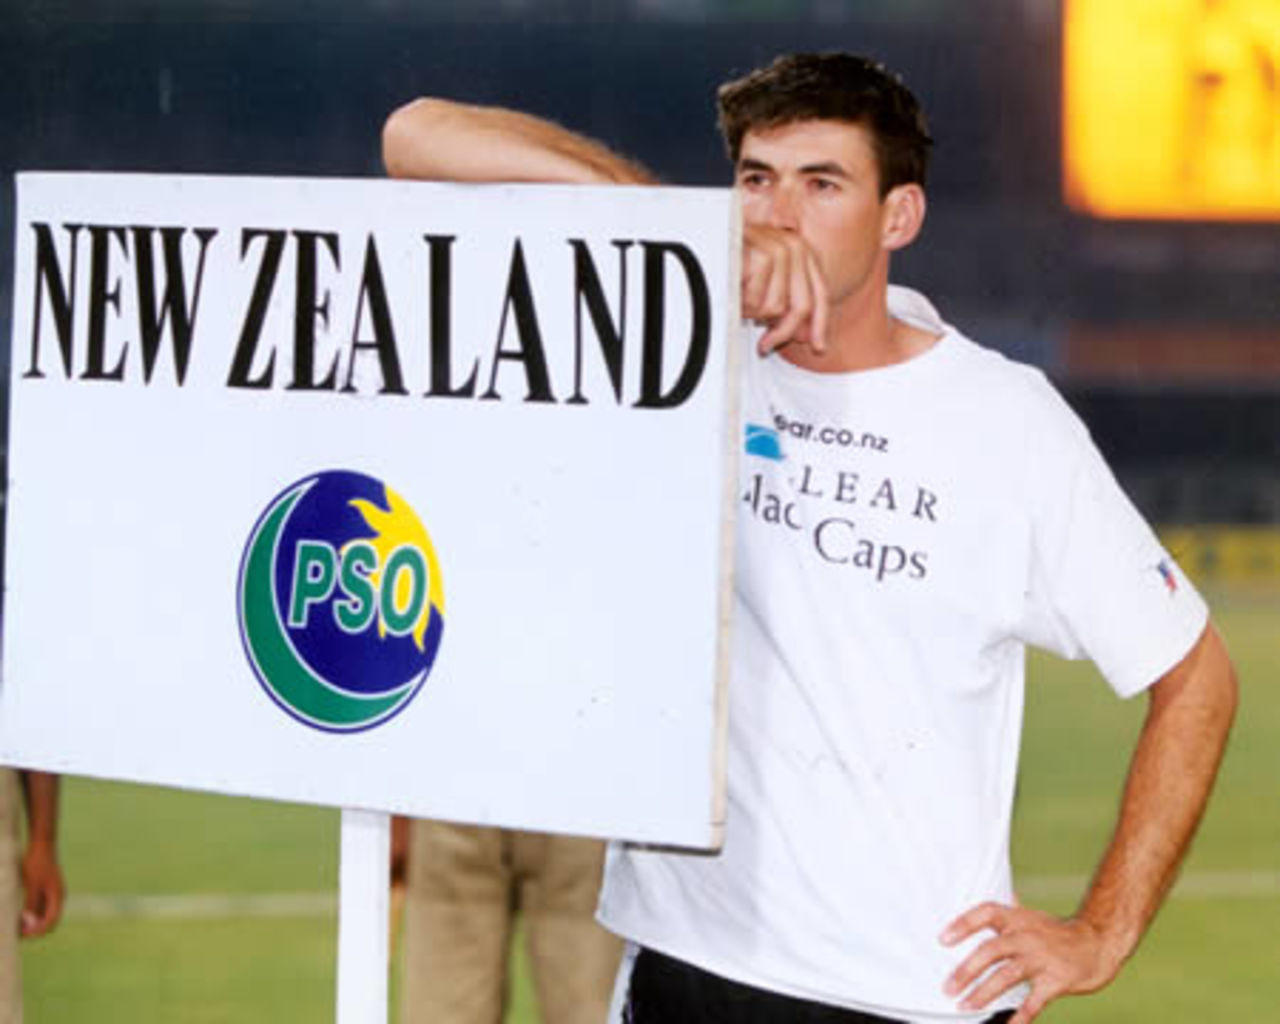 Stephen Fleming waiting for presentation ceremony - 3rd ODI at Lahore, New Zealand v Pakistan, 27 Apr 2002